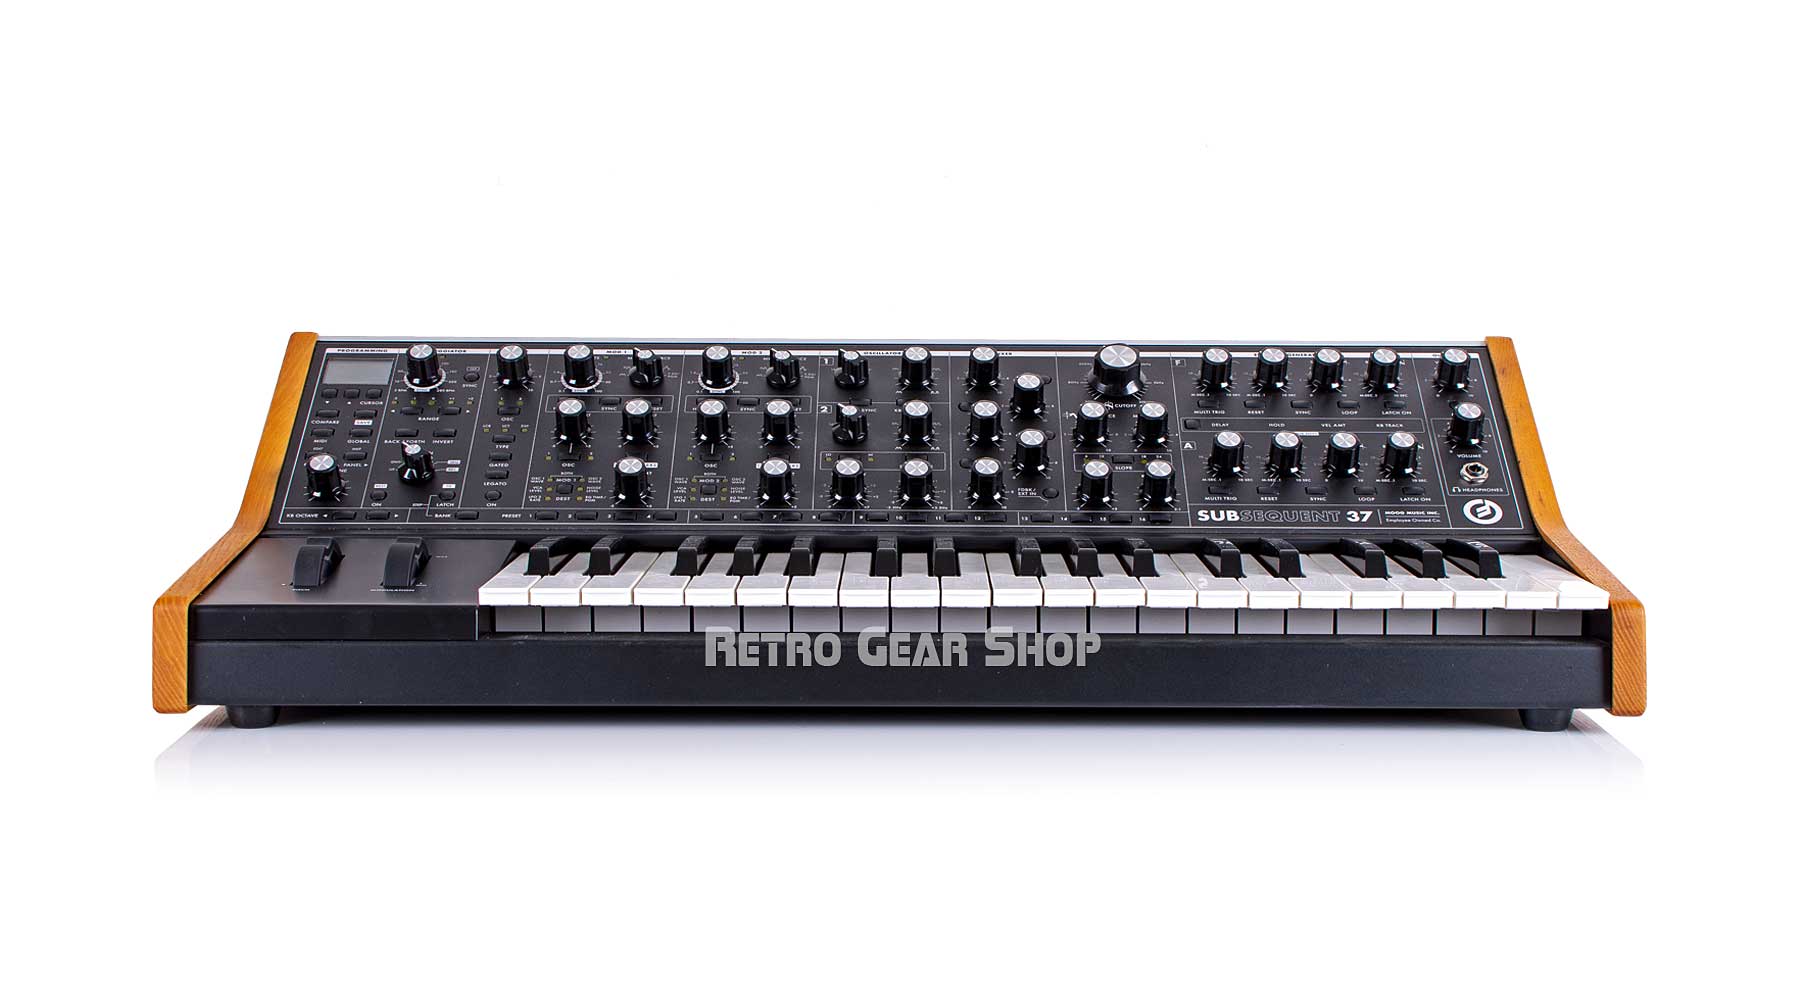 Moog Subsequent 37 Paraphonic Analog Synthesizer Front